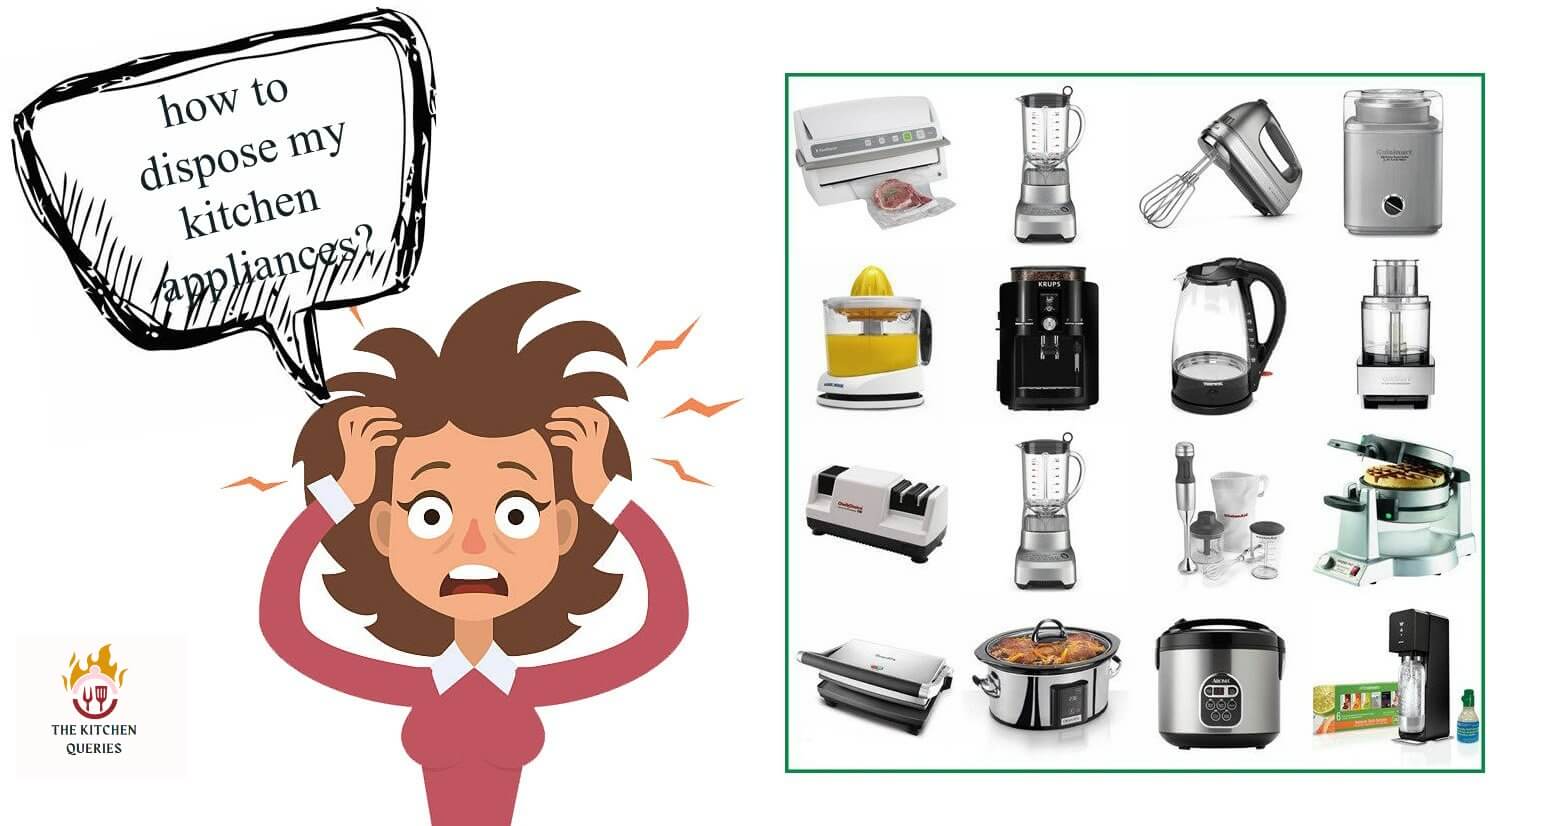 Dispose of Small Kitchen appliances